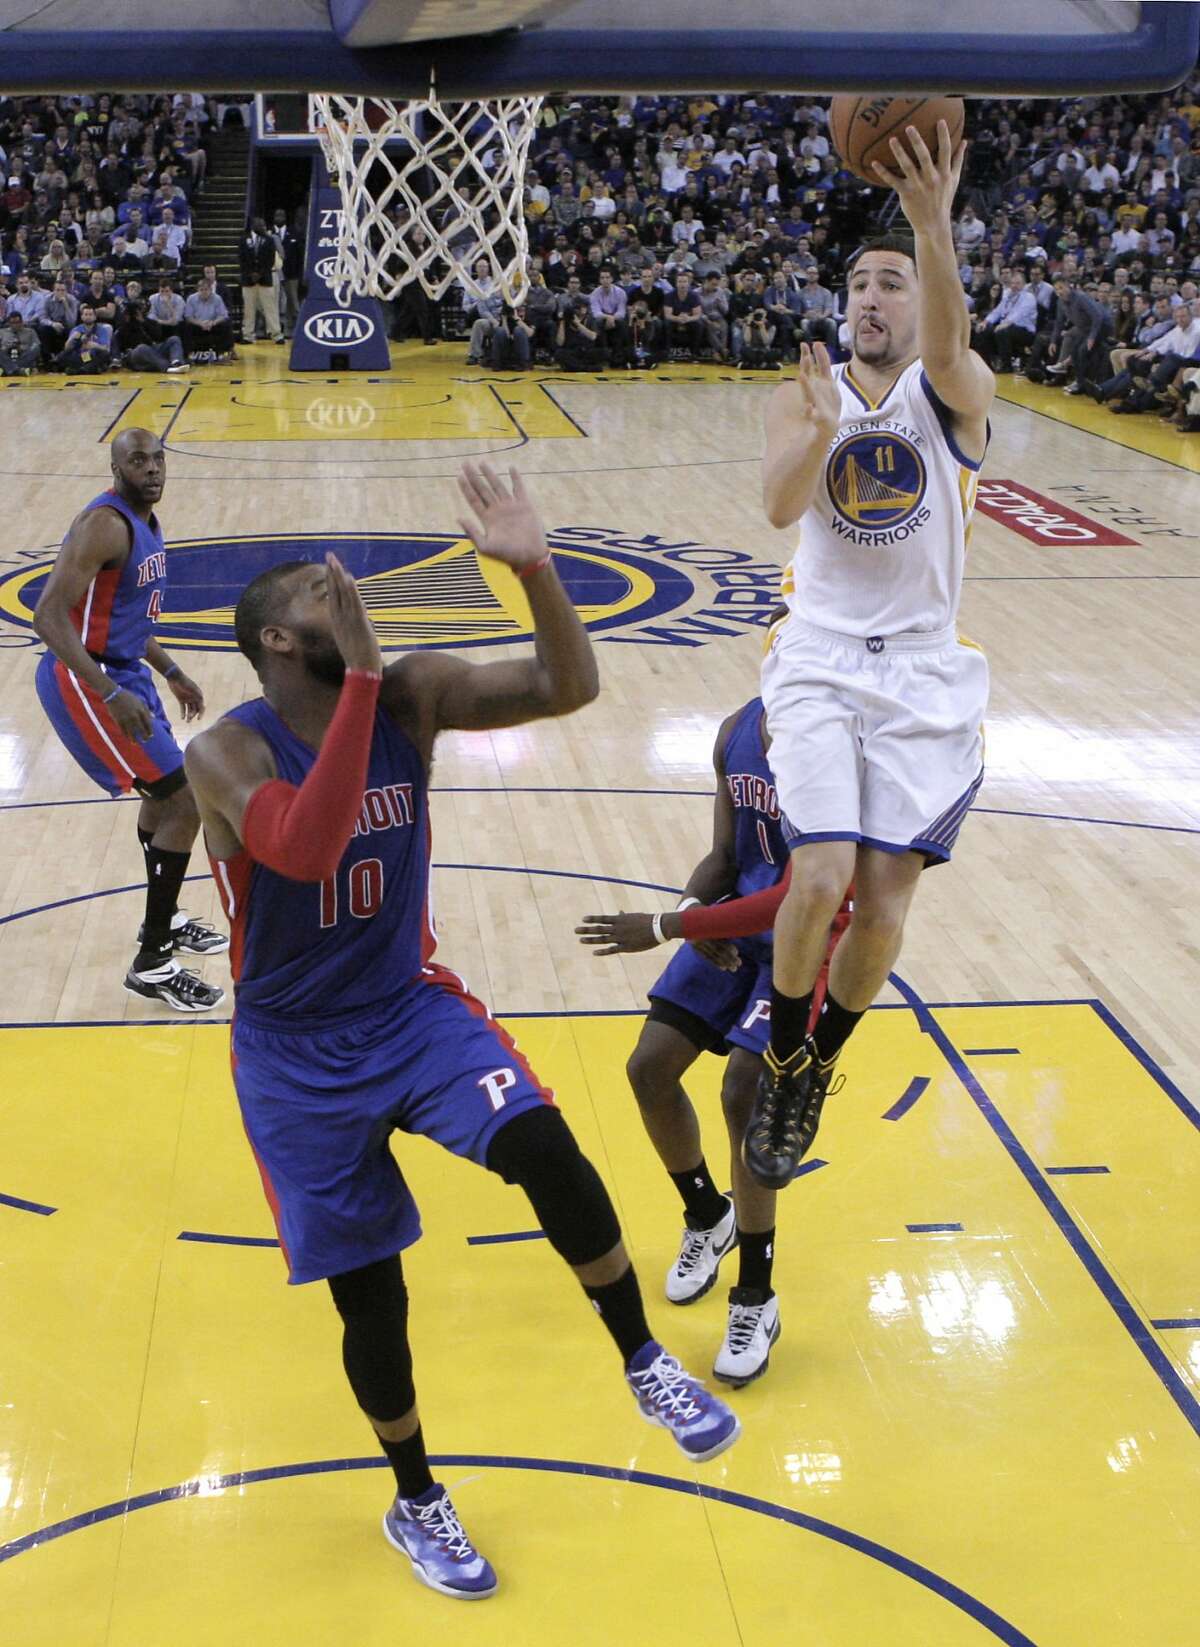 Klay Thompson (11) shoots in the first half. The Golden State Warriors played the Detroit Pistons at Oracle Arena in Oakland, Calif., on Wednesday, March 11, 2015.